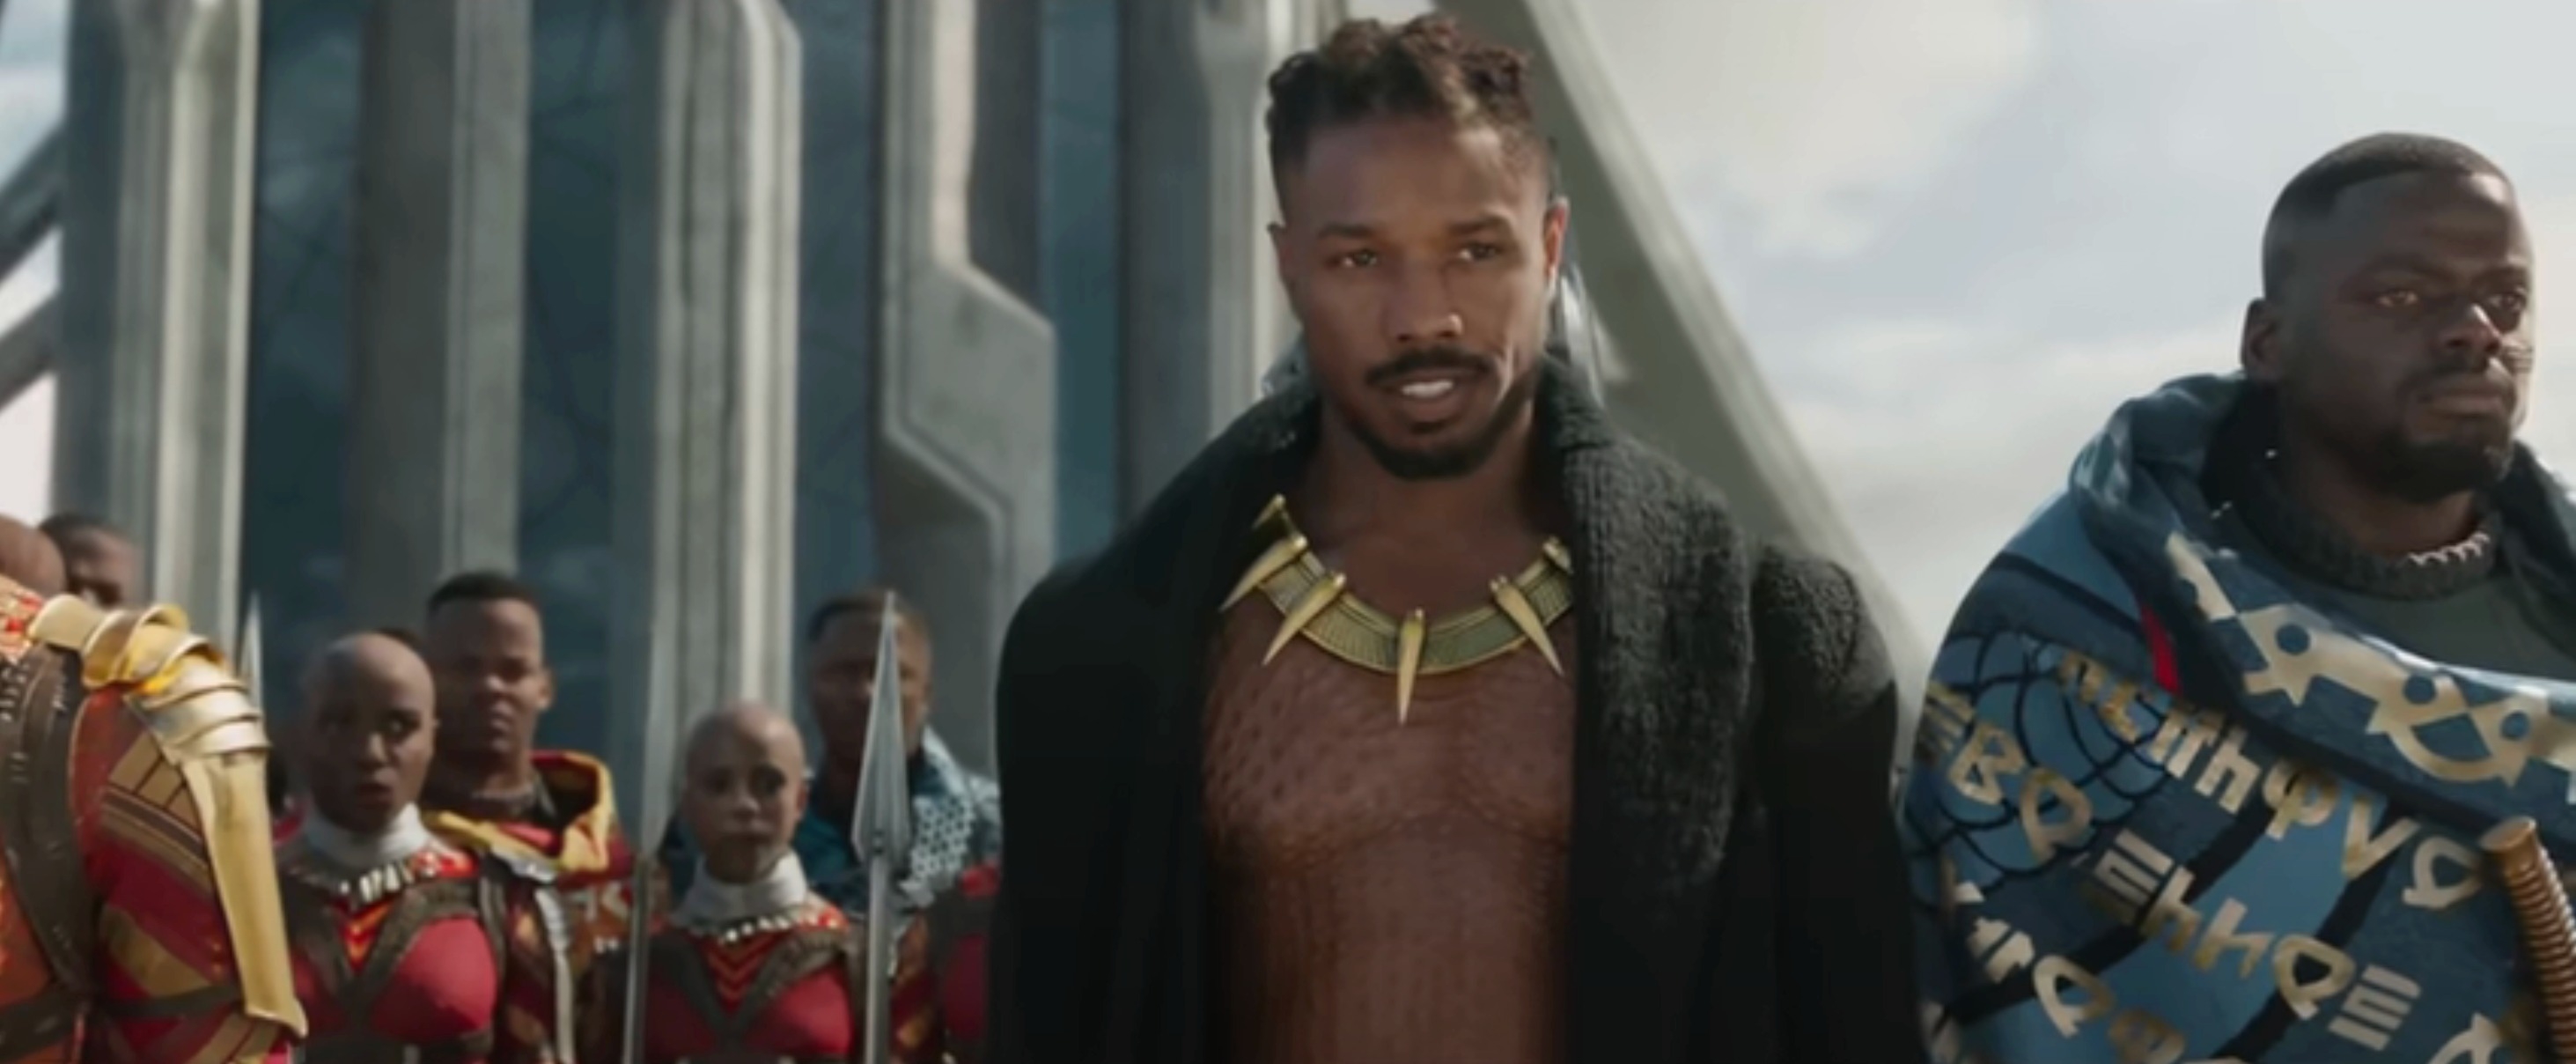 Michael as Kilmonger, wearing an open coat and Wakandan necklace, surrounded by guards